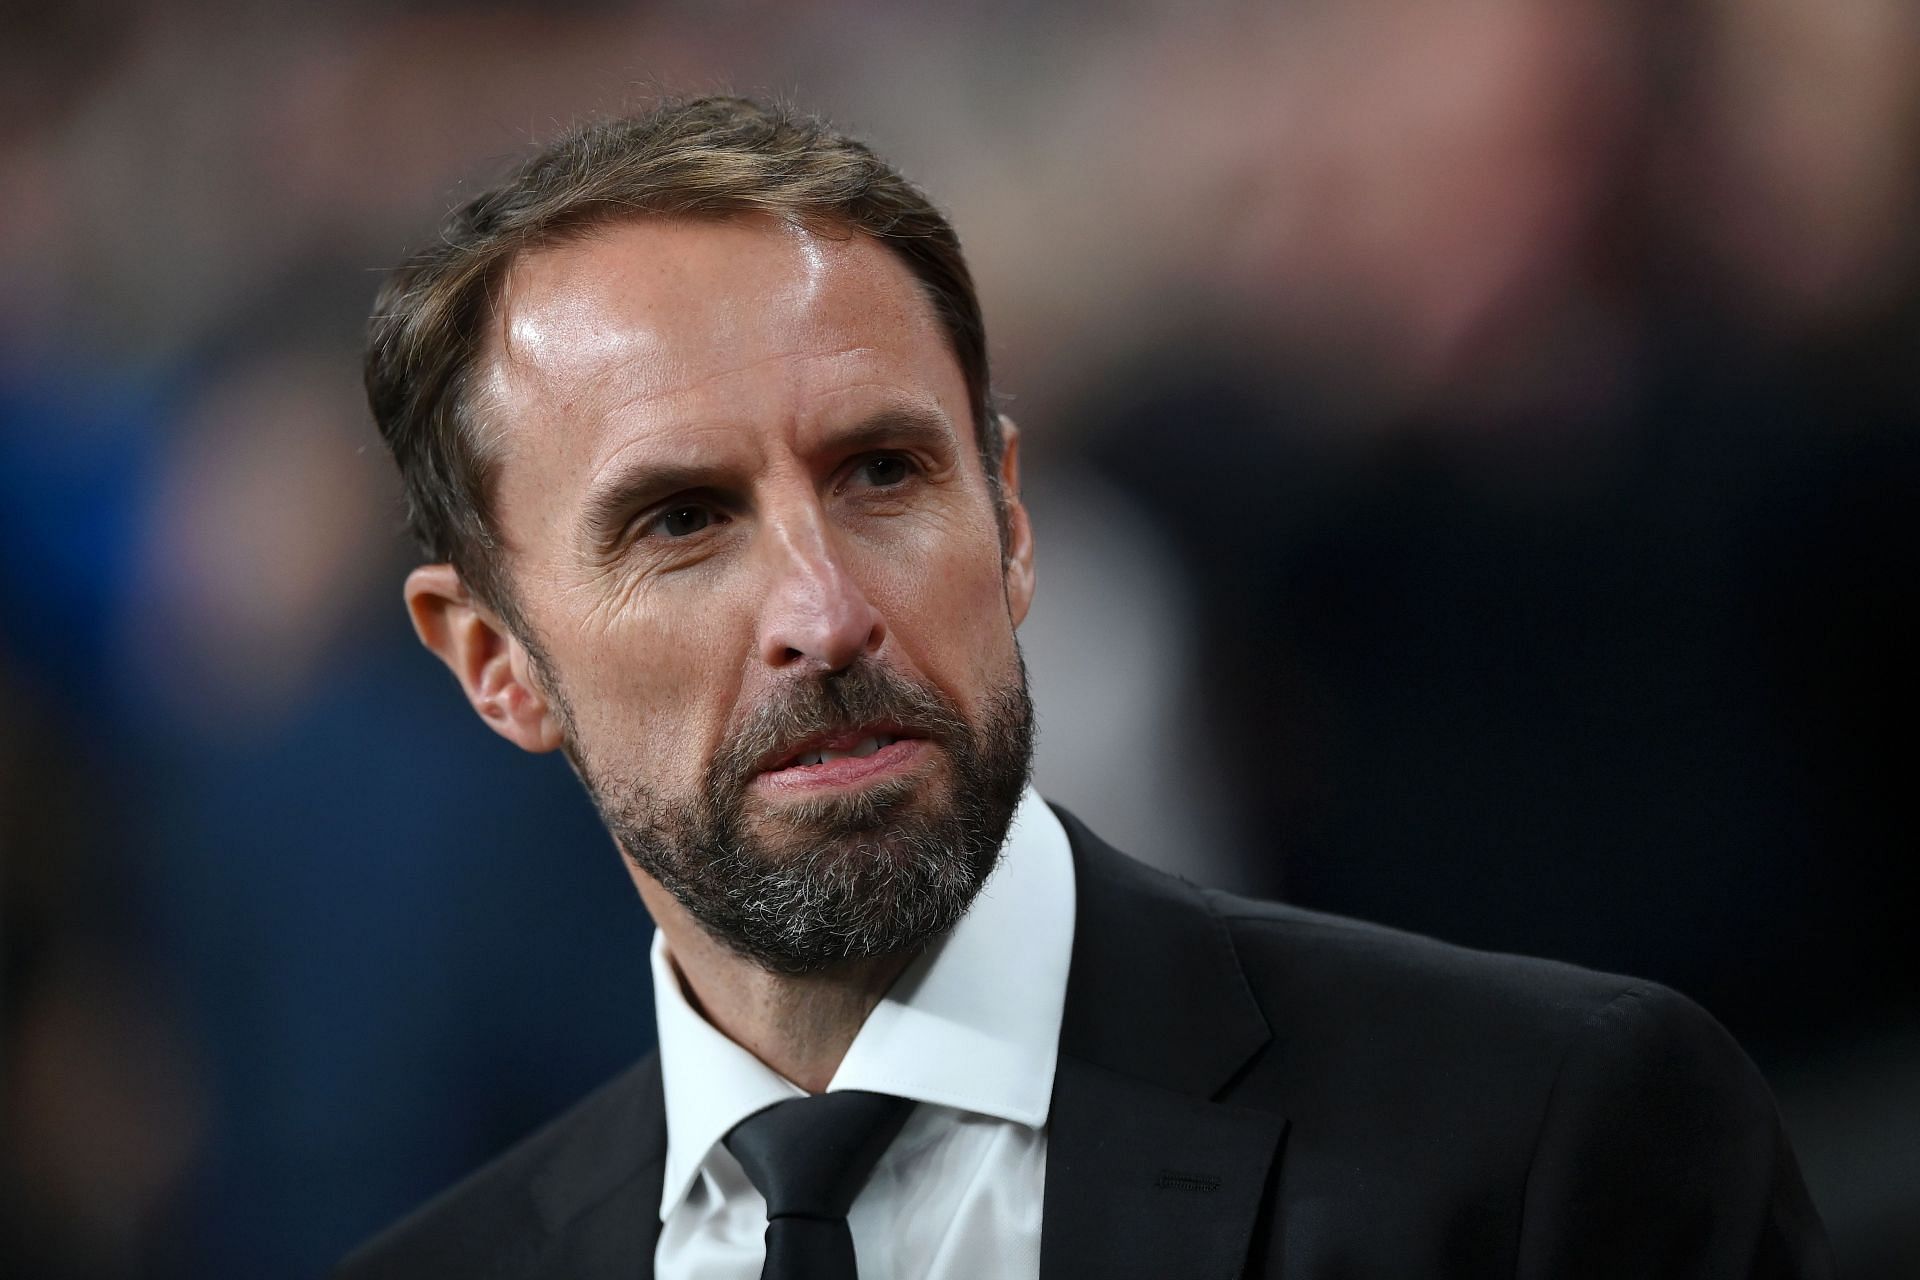 Gareth Southgate will lead the Three Lions into the World Cup once again this year.